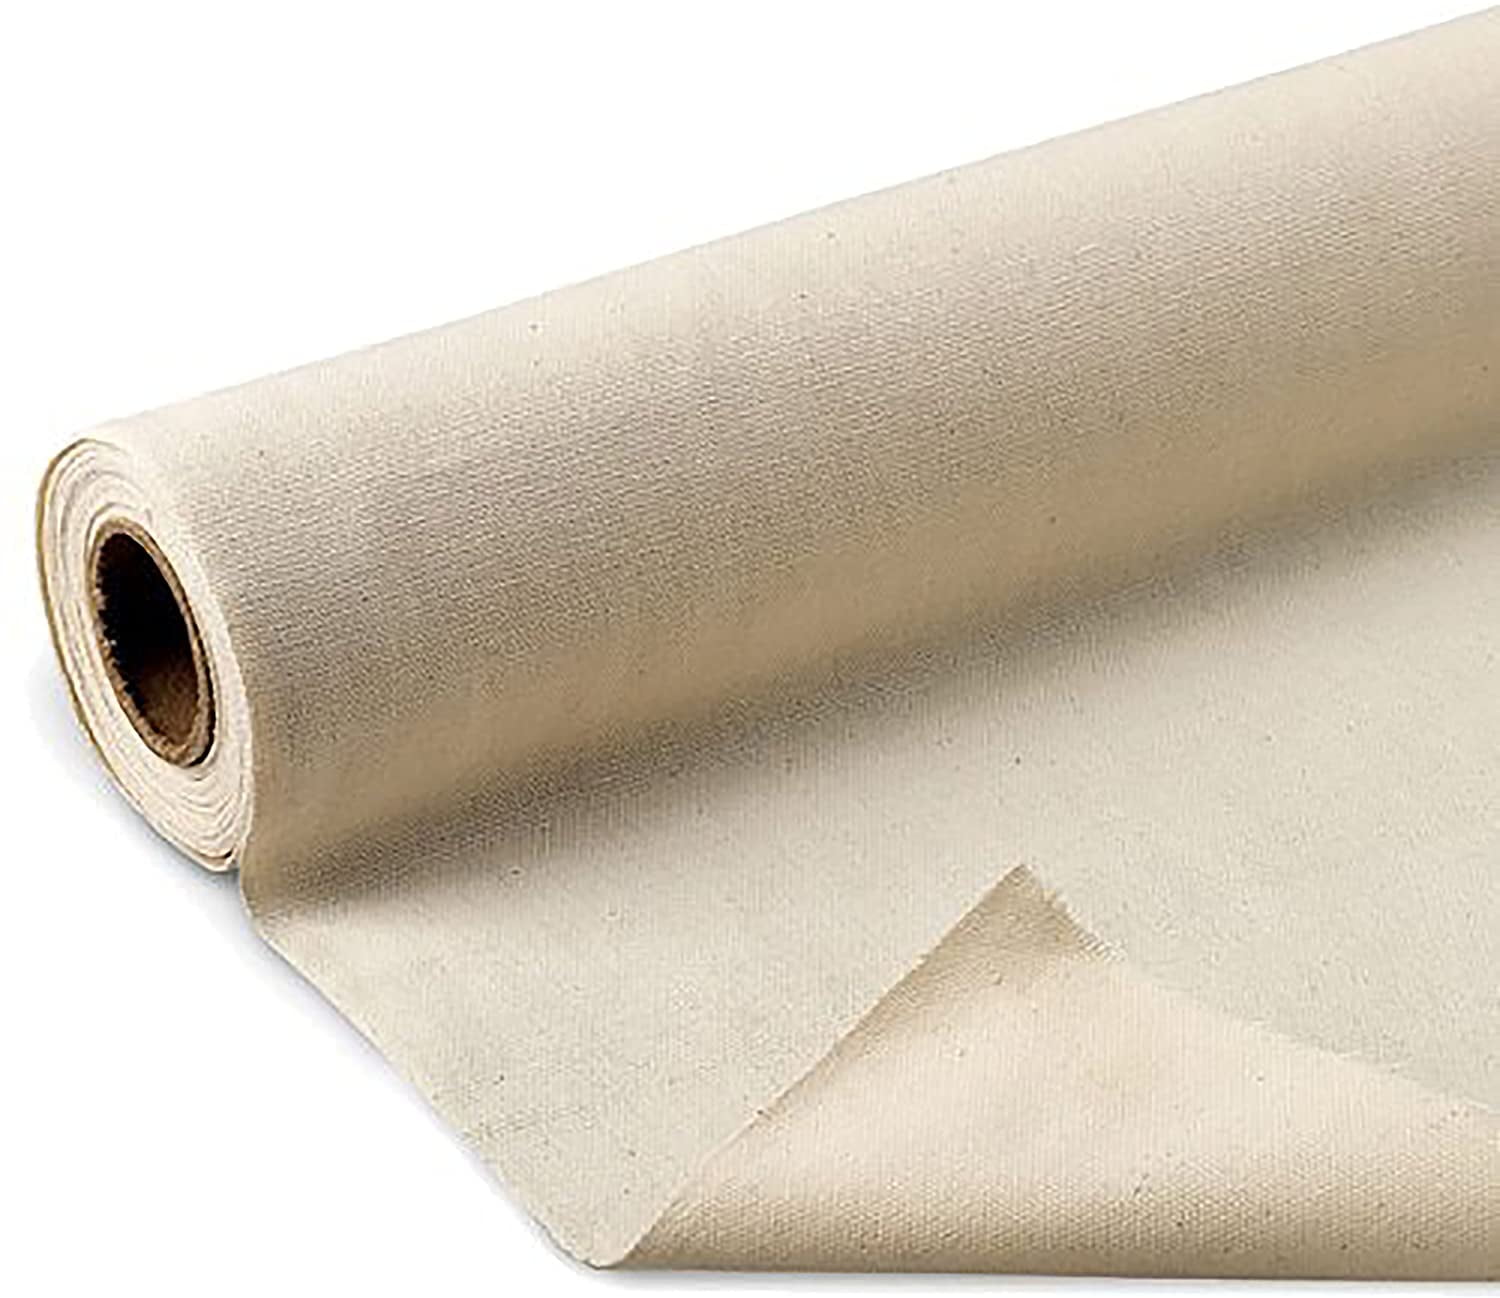 60" Wide Unprimed Cotton Canvas Fabric 7oz Natural Duck Cloth by the